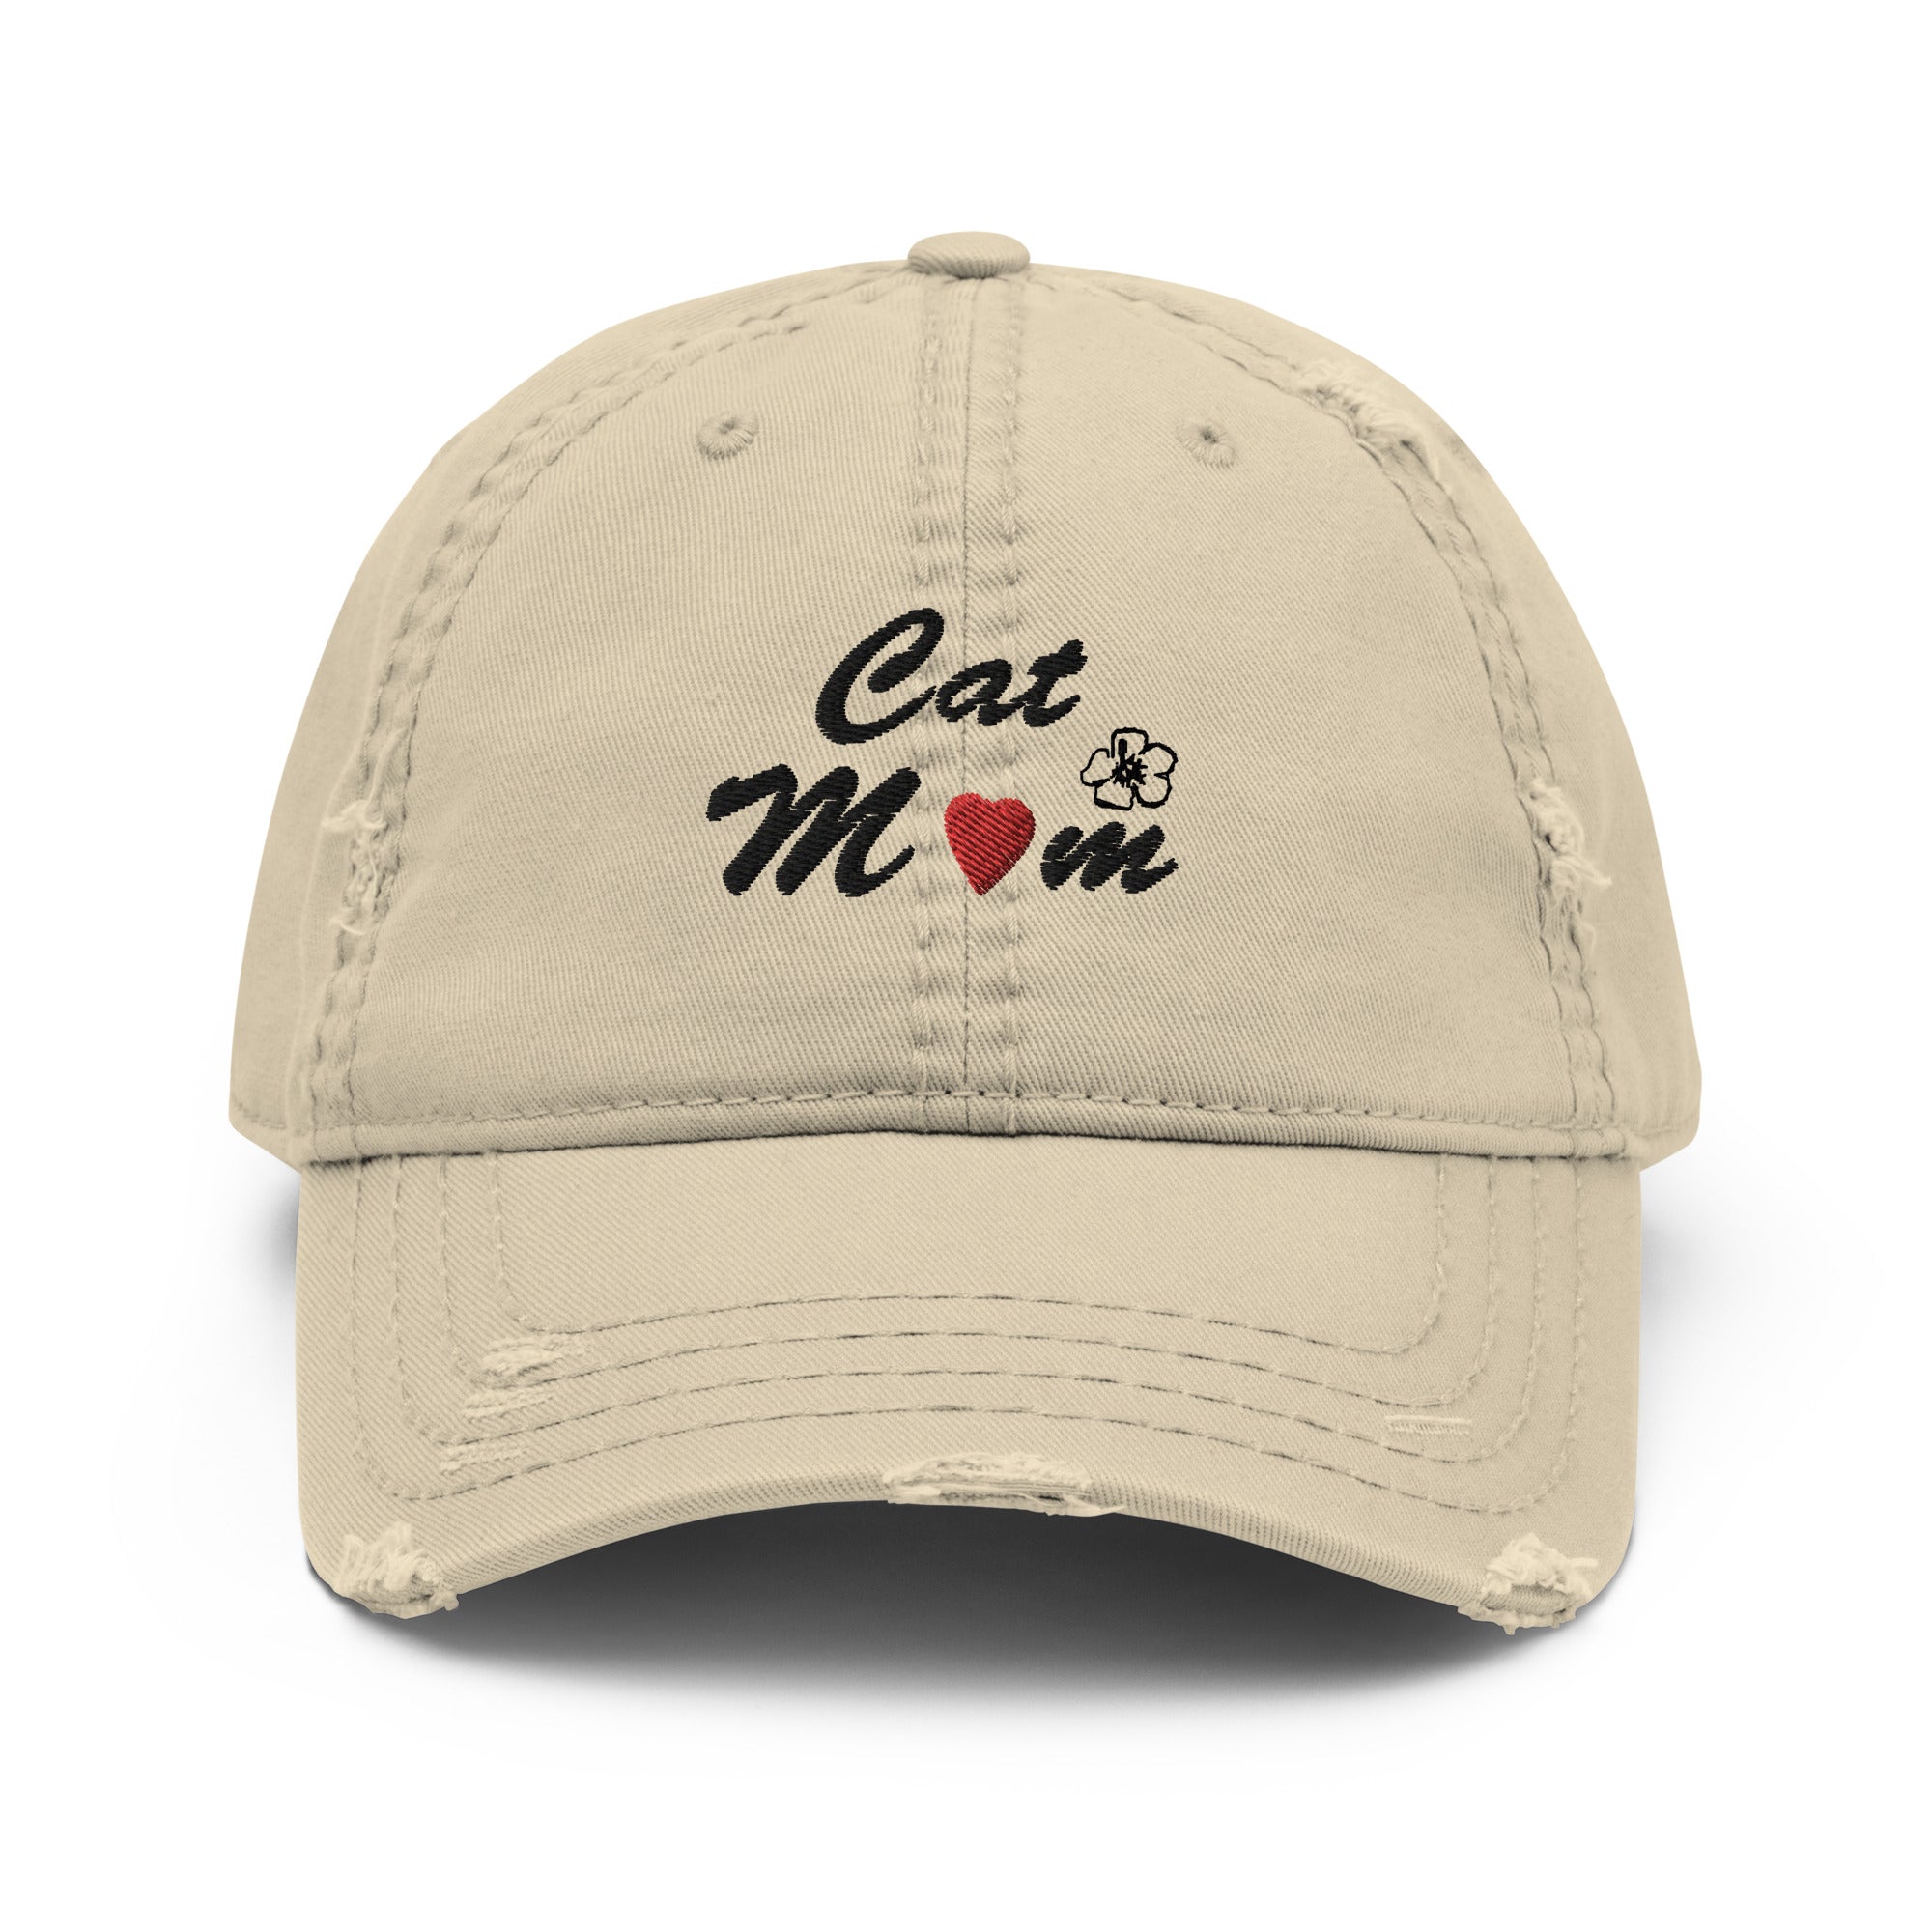 Adjustable Embroidered Distressed Hat for Cat Moms